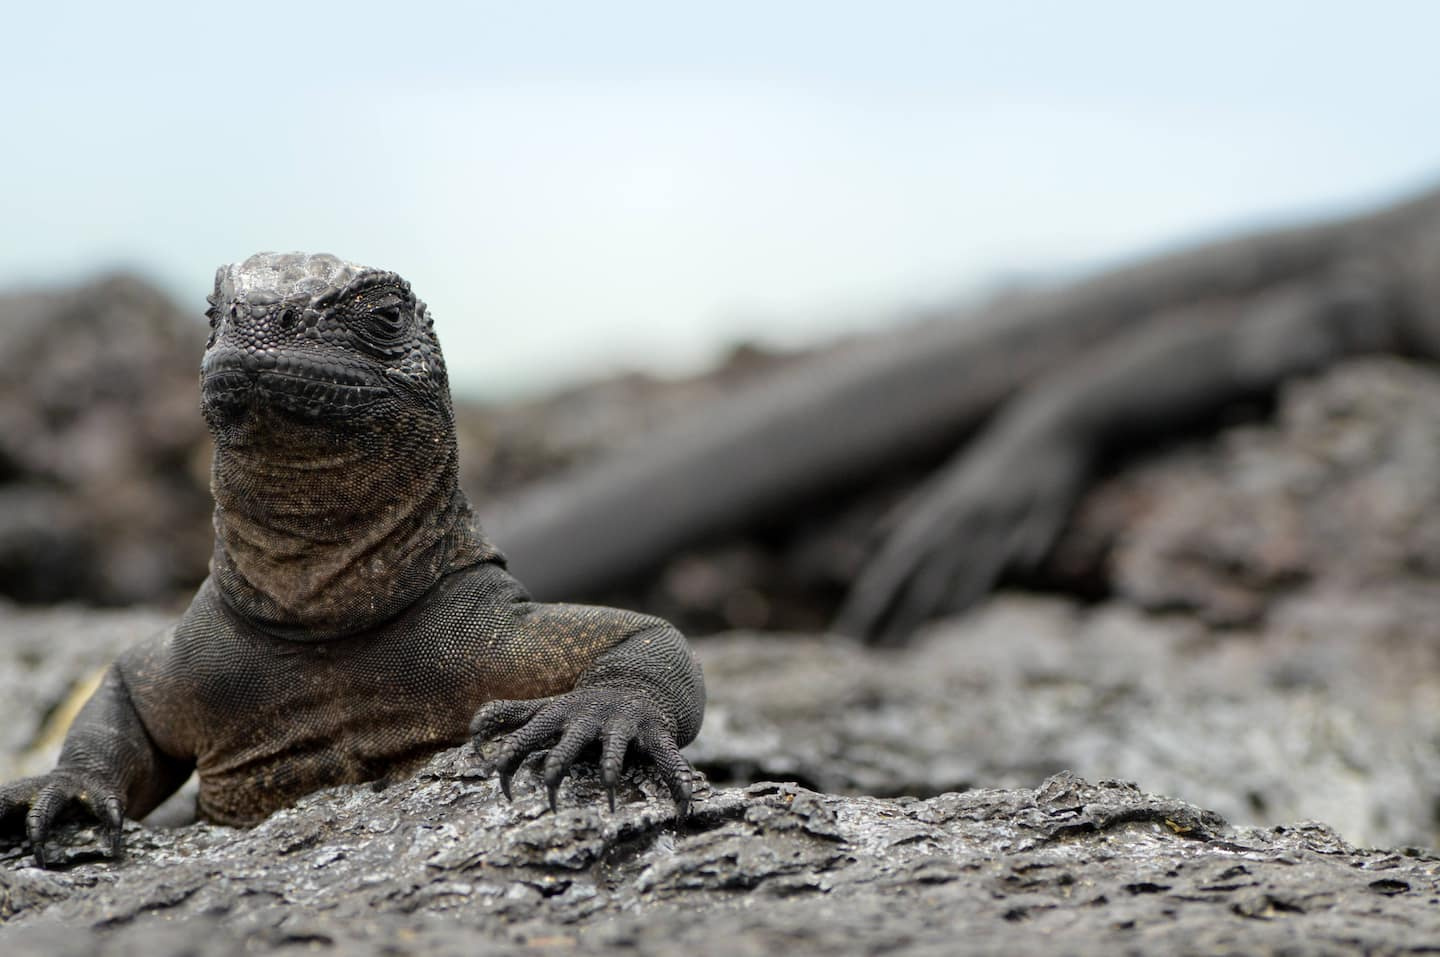 Iguanas that disappeared a century ago are breeding again in Galapagos